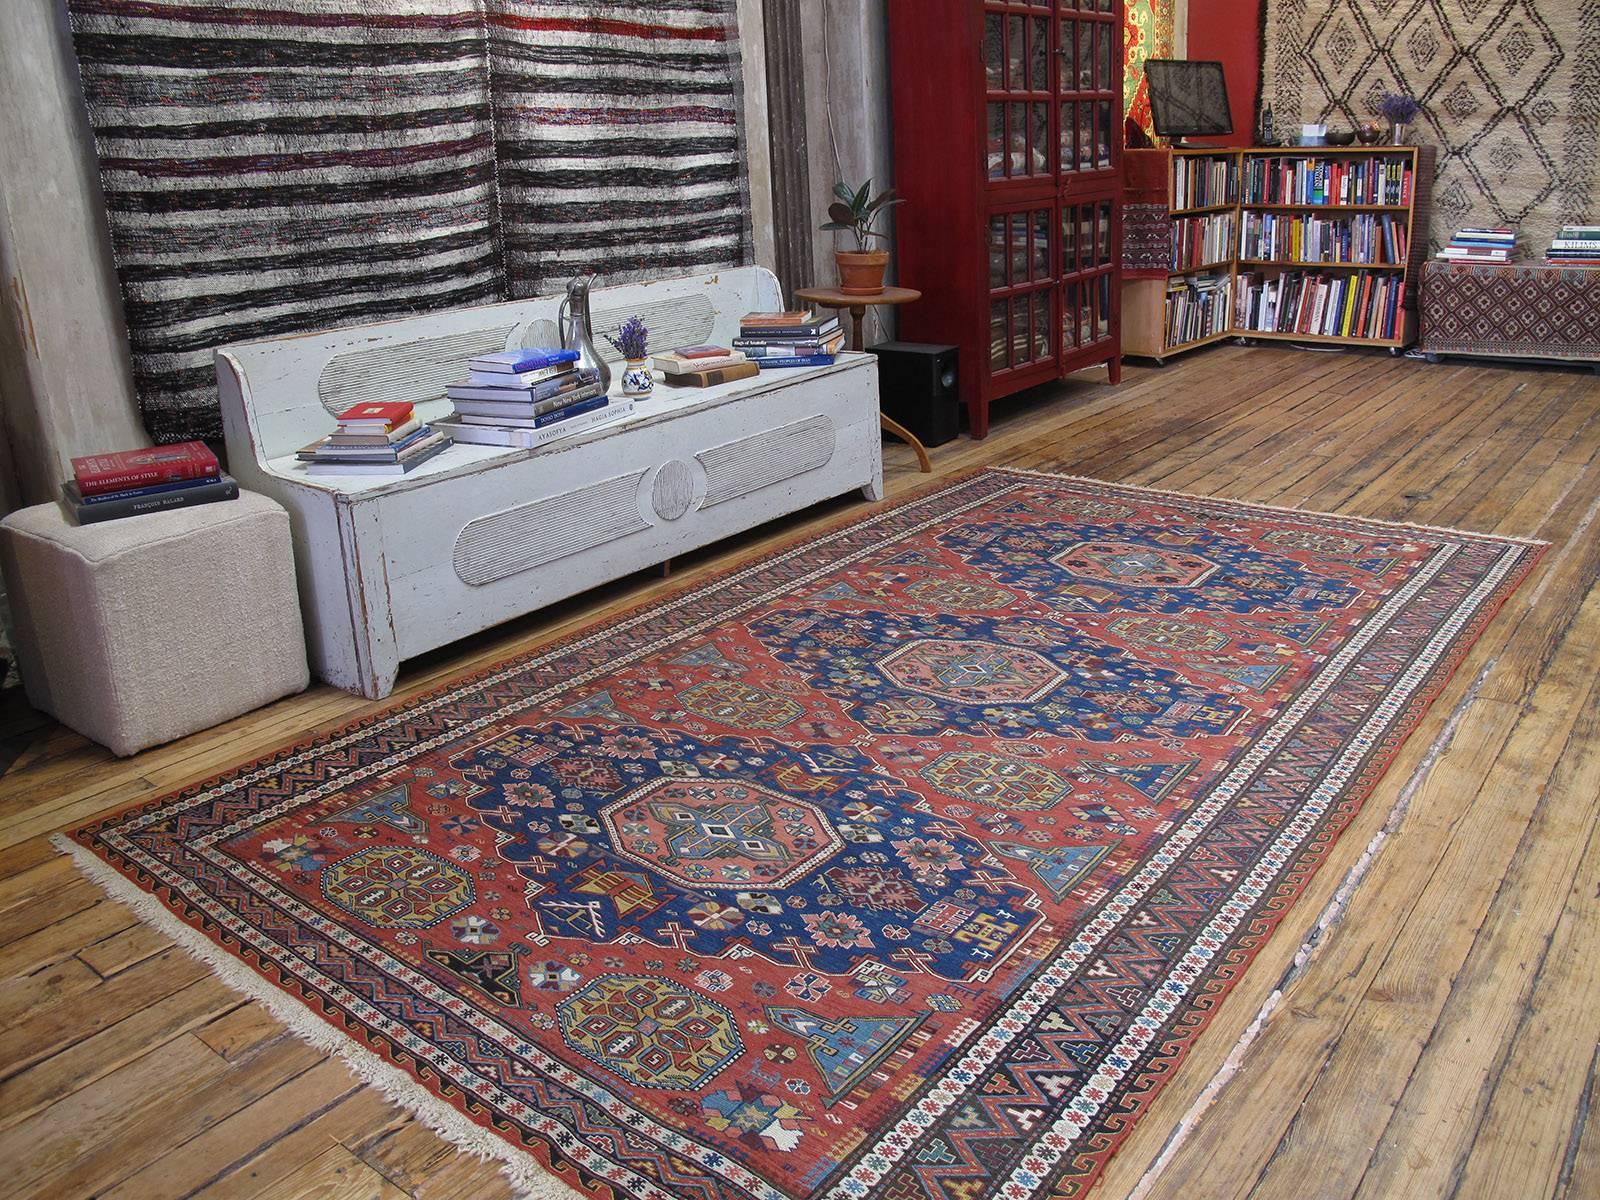 Antique Caucasian Sumak rug. A very nice antique flat-weave rug from the Caucasus, woven in the intricate 